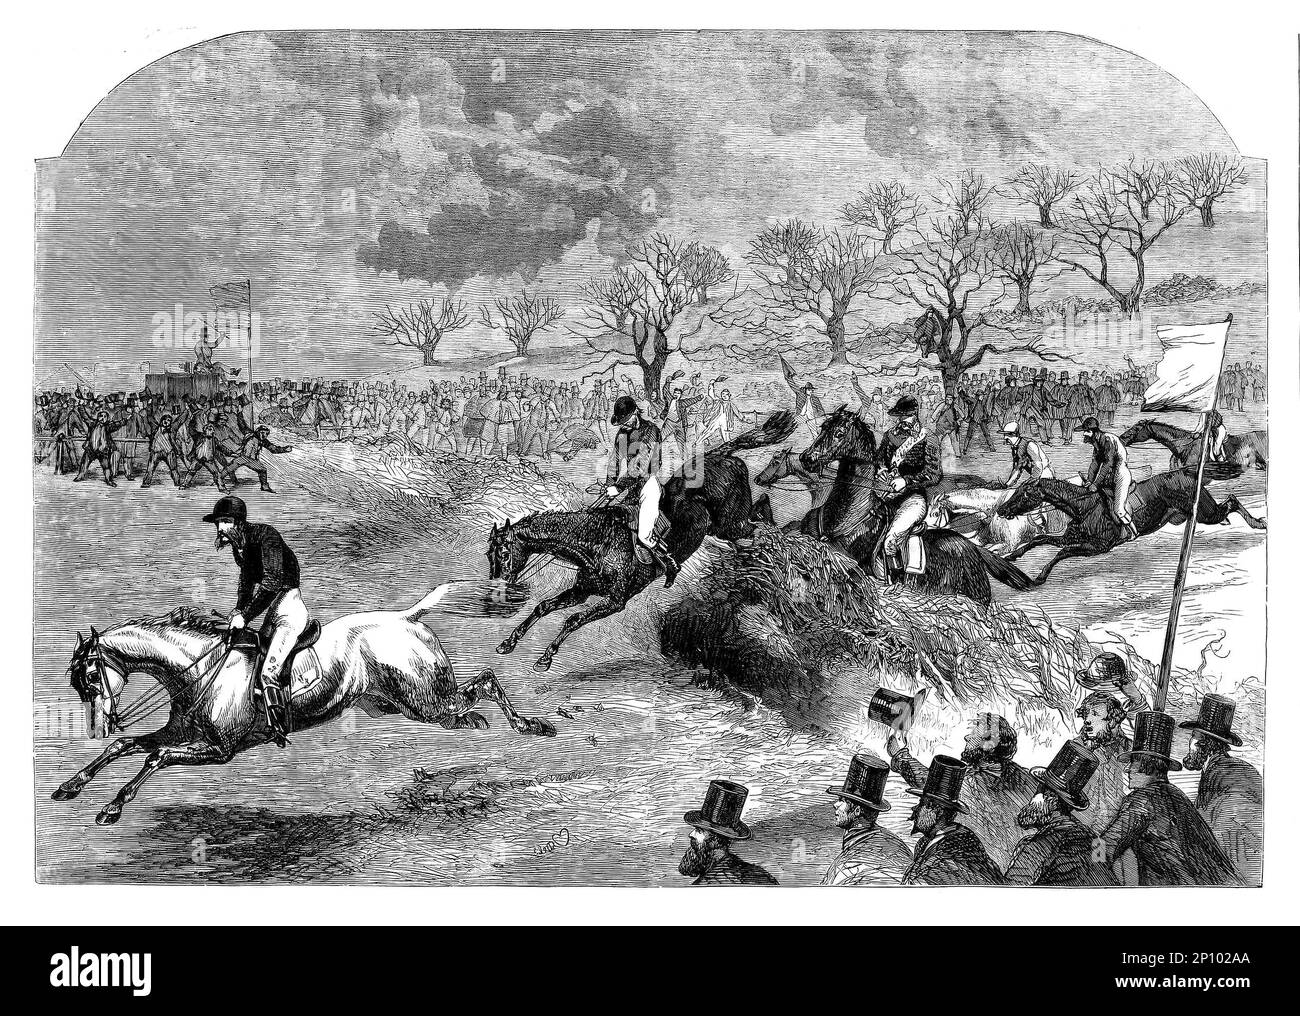 The excitement and action of the Grand Military Gold Cup horse race, during the Northampton Steeple Chases of 1860, drawn by the British artist Harrison William Weir (1824-1906) Stock Photo